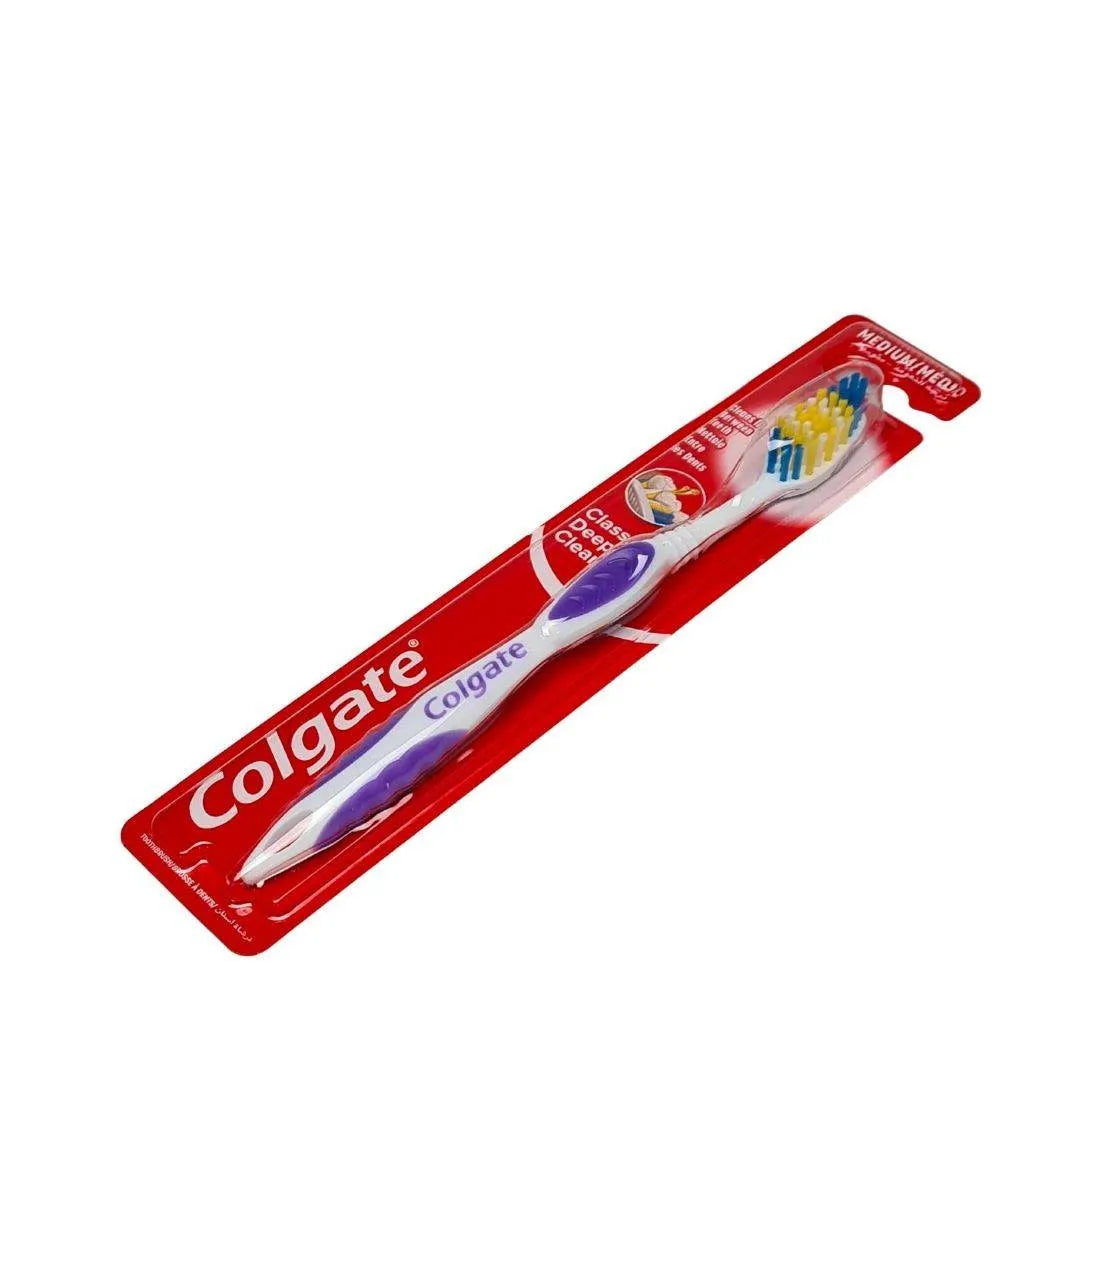 Close-up photo of a purple Colgate Classic toothbrush with medium bristles. Text highlights "Deep Clean" and "Vibrant Color